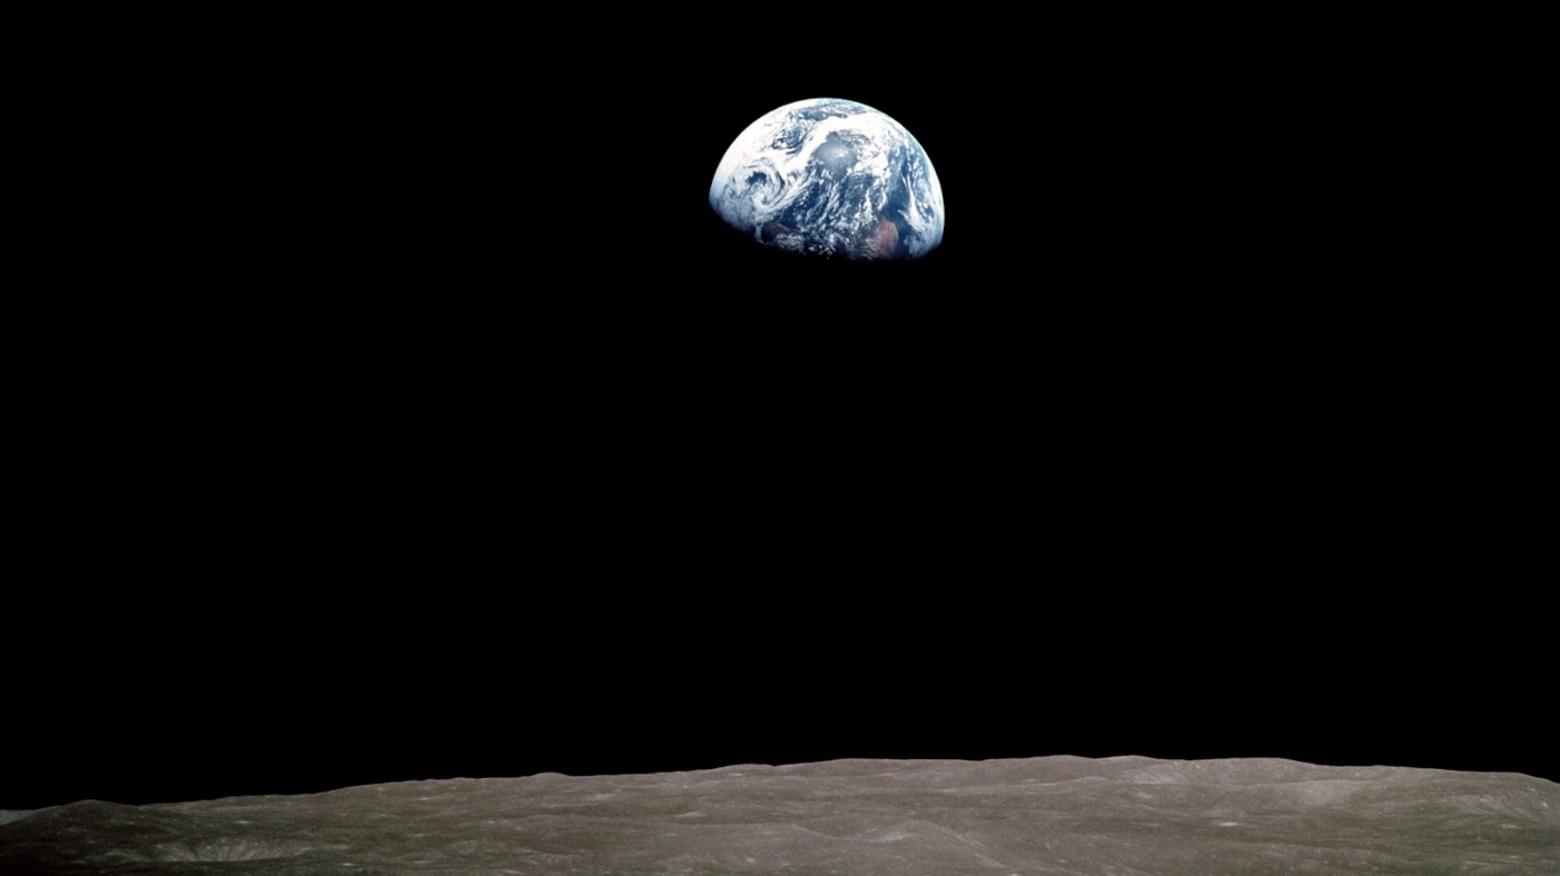 Earthrise captured by Apollo 8 astronaut Bill Anders. Photo courtesy NASA